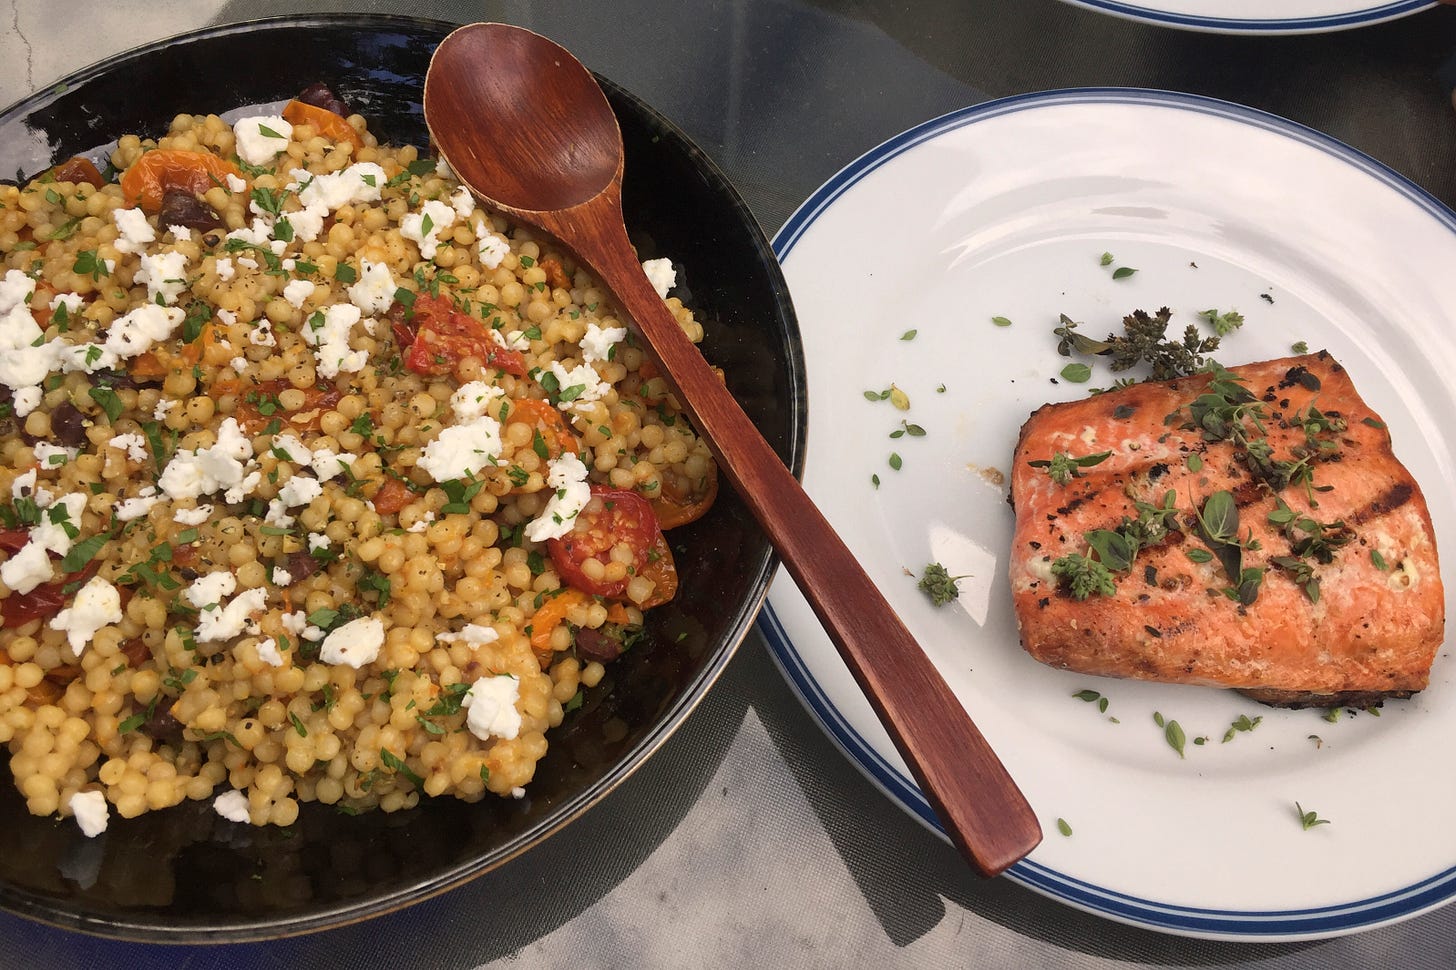 A black shallow bowl of pearl couscous salad with roasted tomatoes and olives, with herbs and feta on top. Next to is is a white plate with a deep pink salmon fillet, covered with a dusting of pepper and some fresh marjoram.